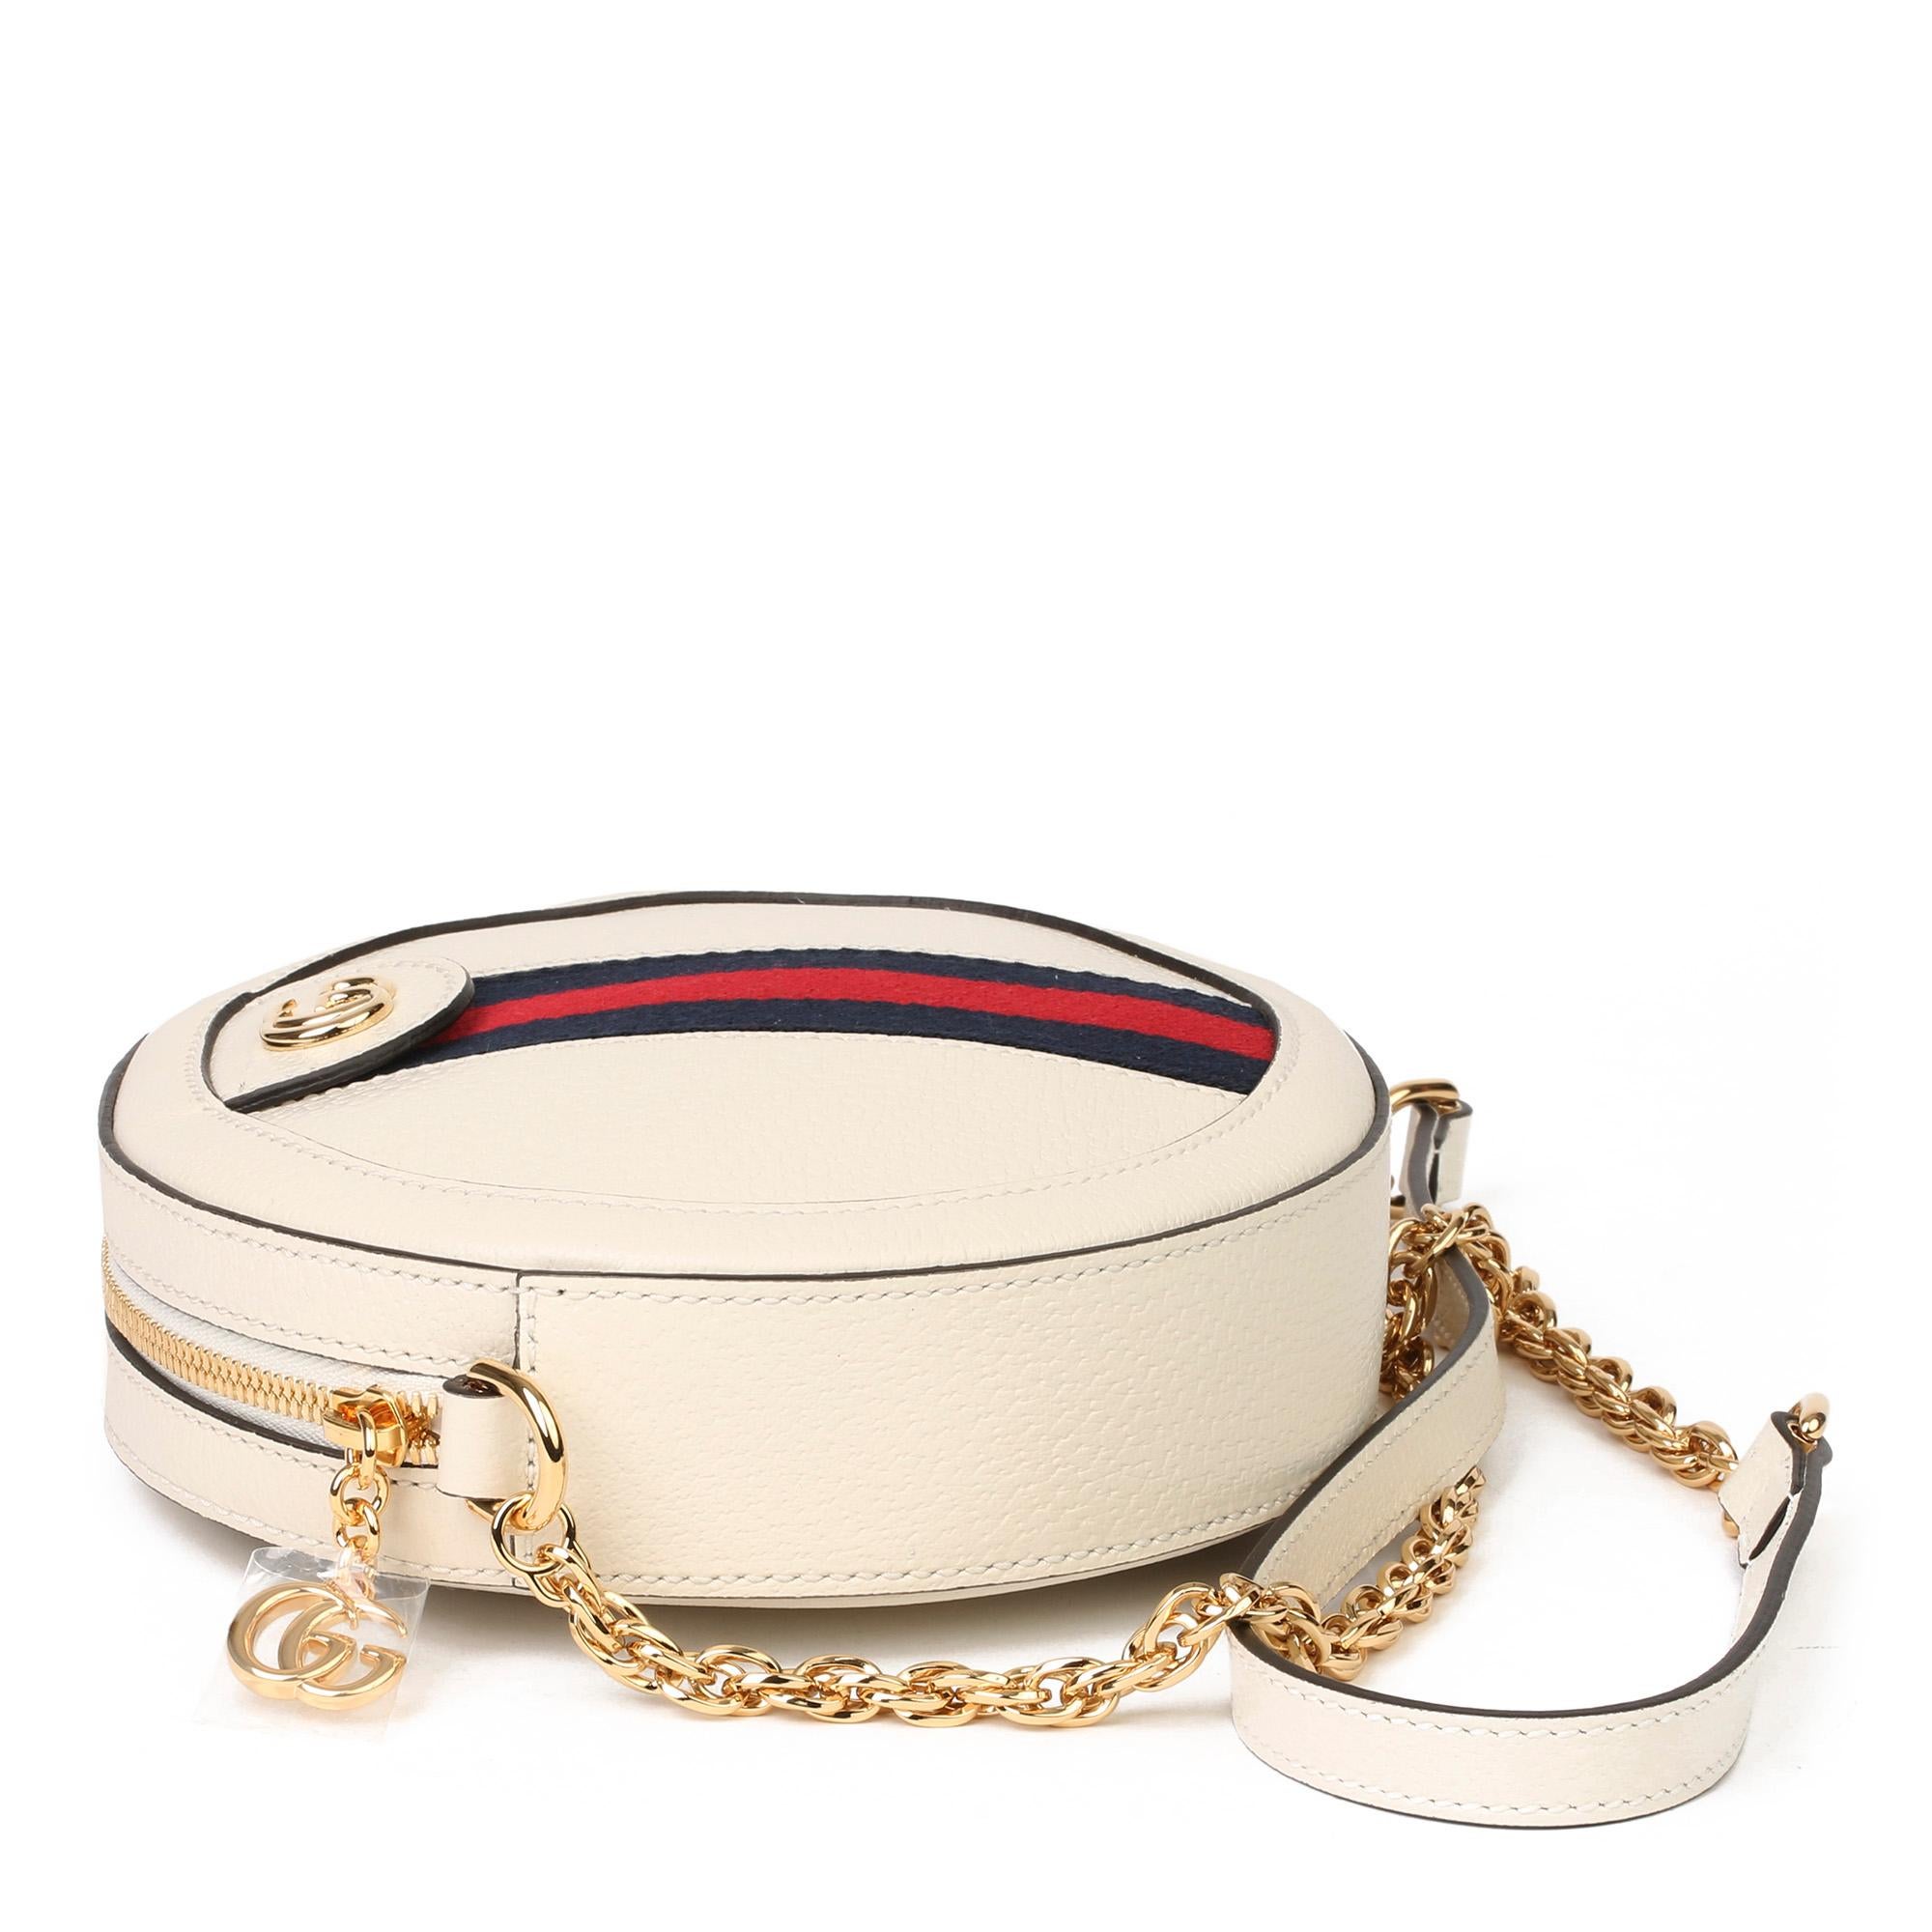 GUCCI
White Pigskin Leather Web Mini Round Orphidia Shoulder Bag

Xupes Reference: HB3710
Serial Number: 550618 520981
Age (Circa): 2020
Accompanied By: Gucci Dust Bag
Authenticity Details: Serial Stamp (Made in Italy) 
Gender: Ladies
Type: